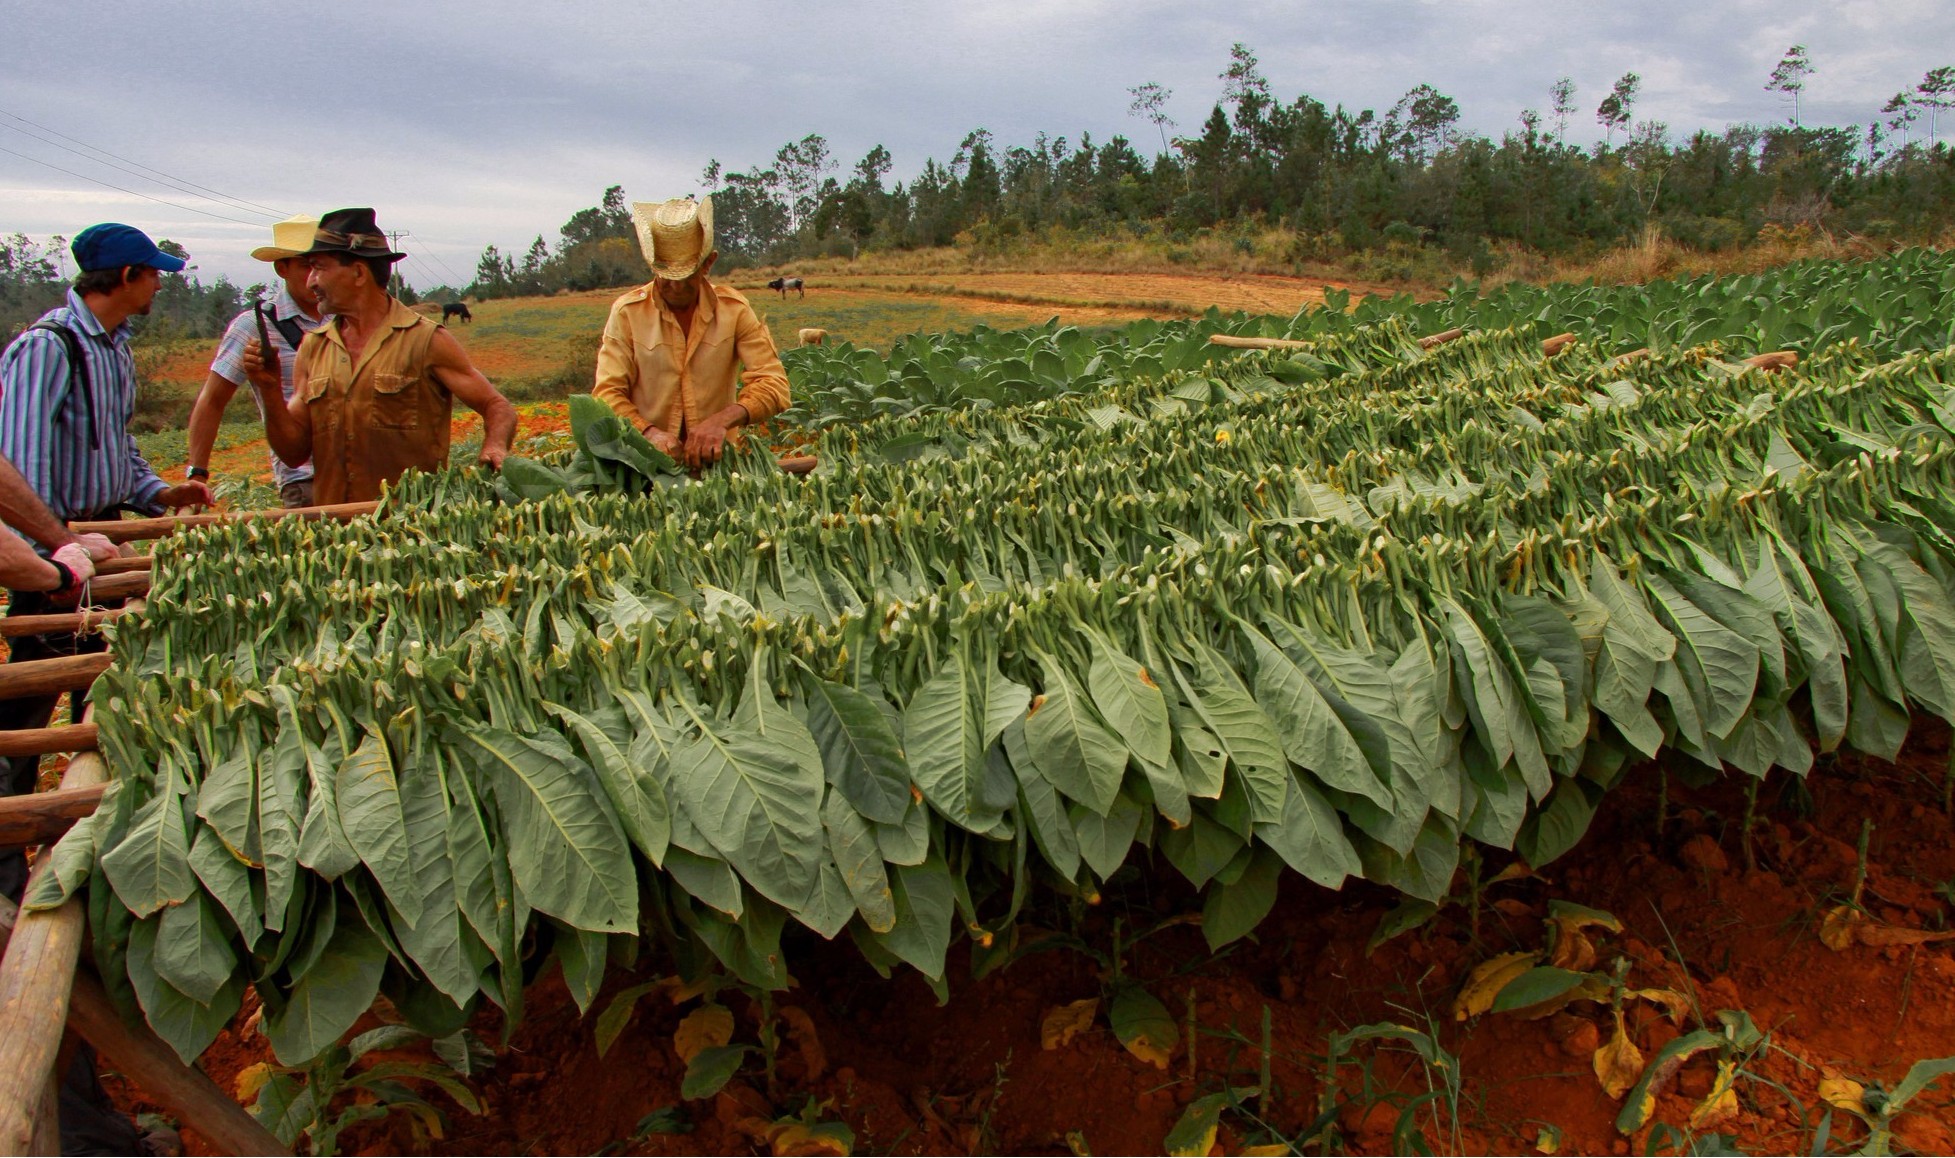 Tobacco growers